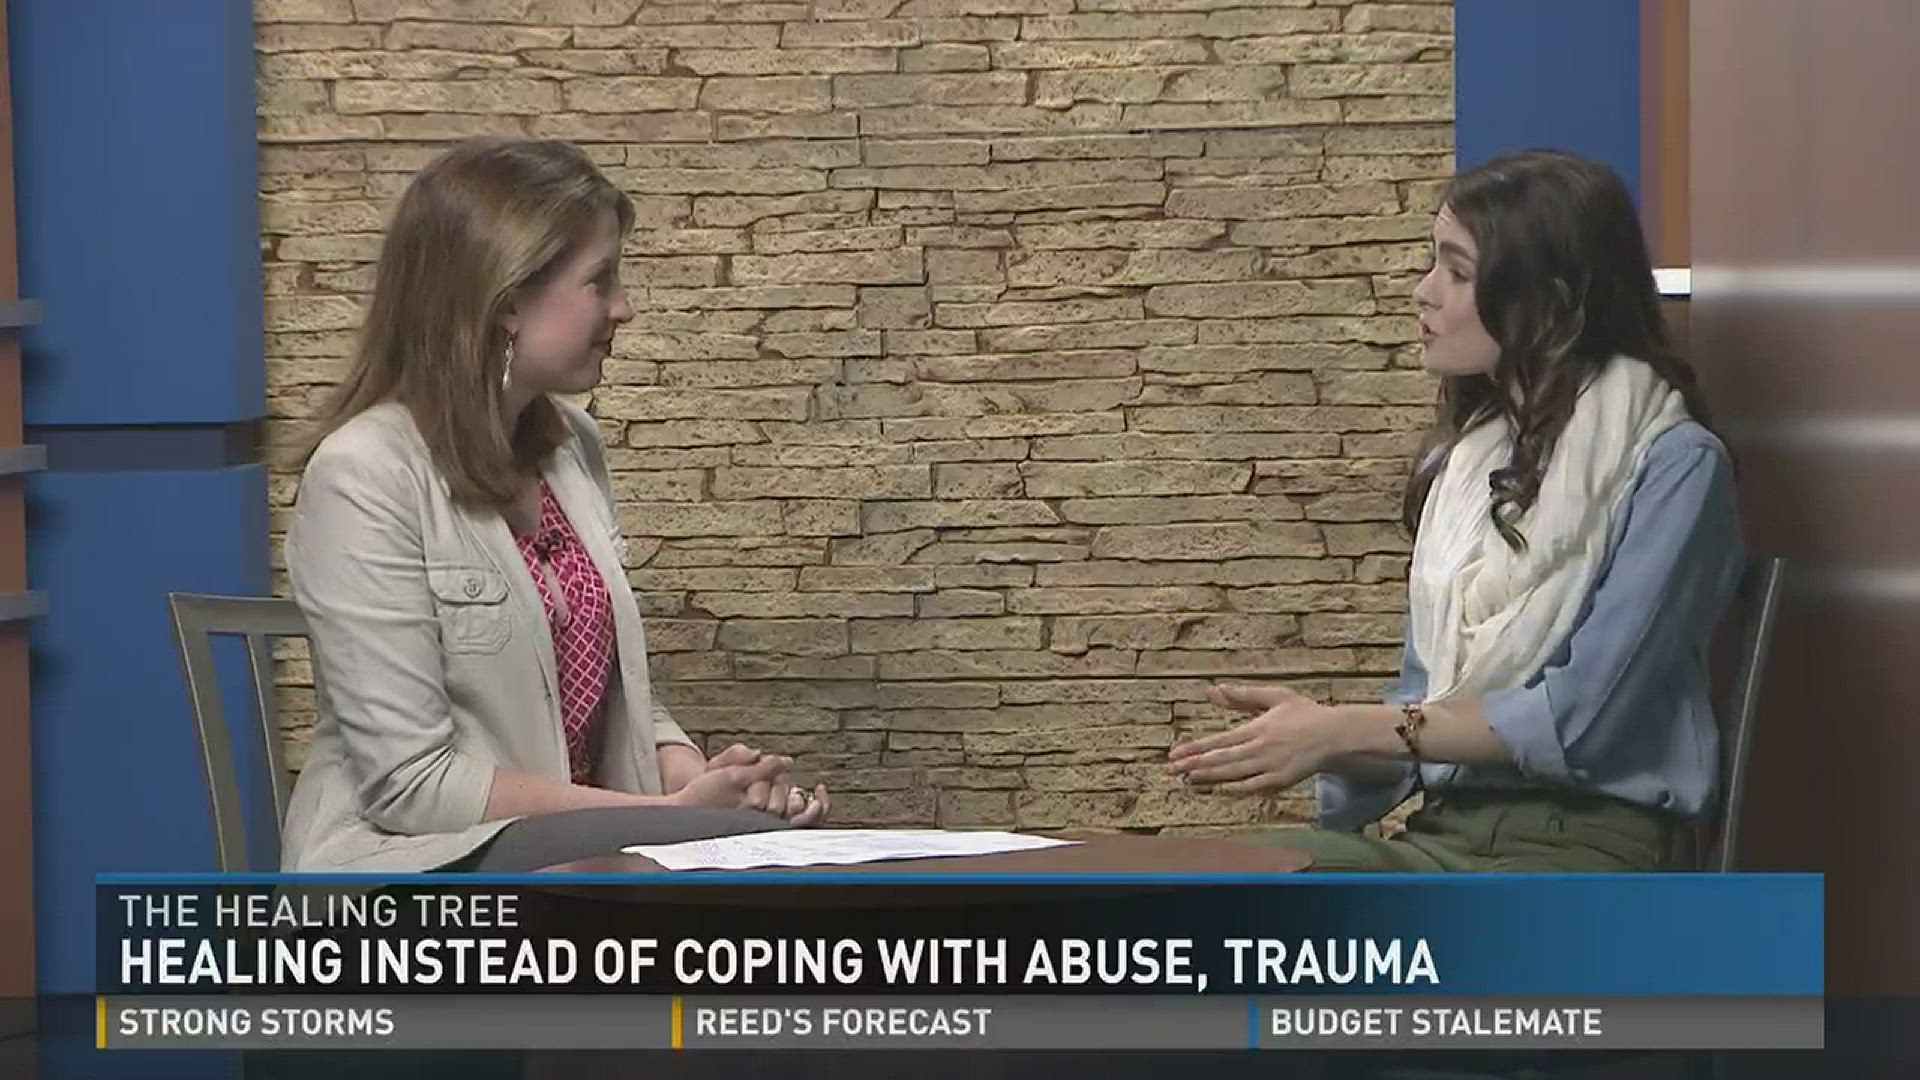 Healing instead of coping with abuse, trauma